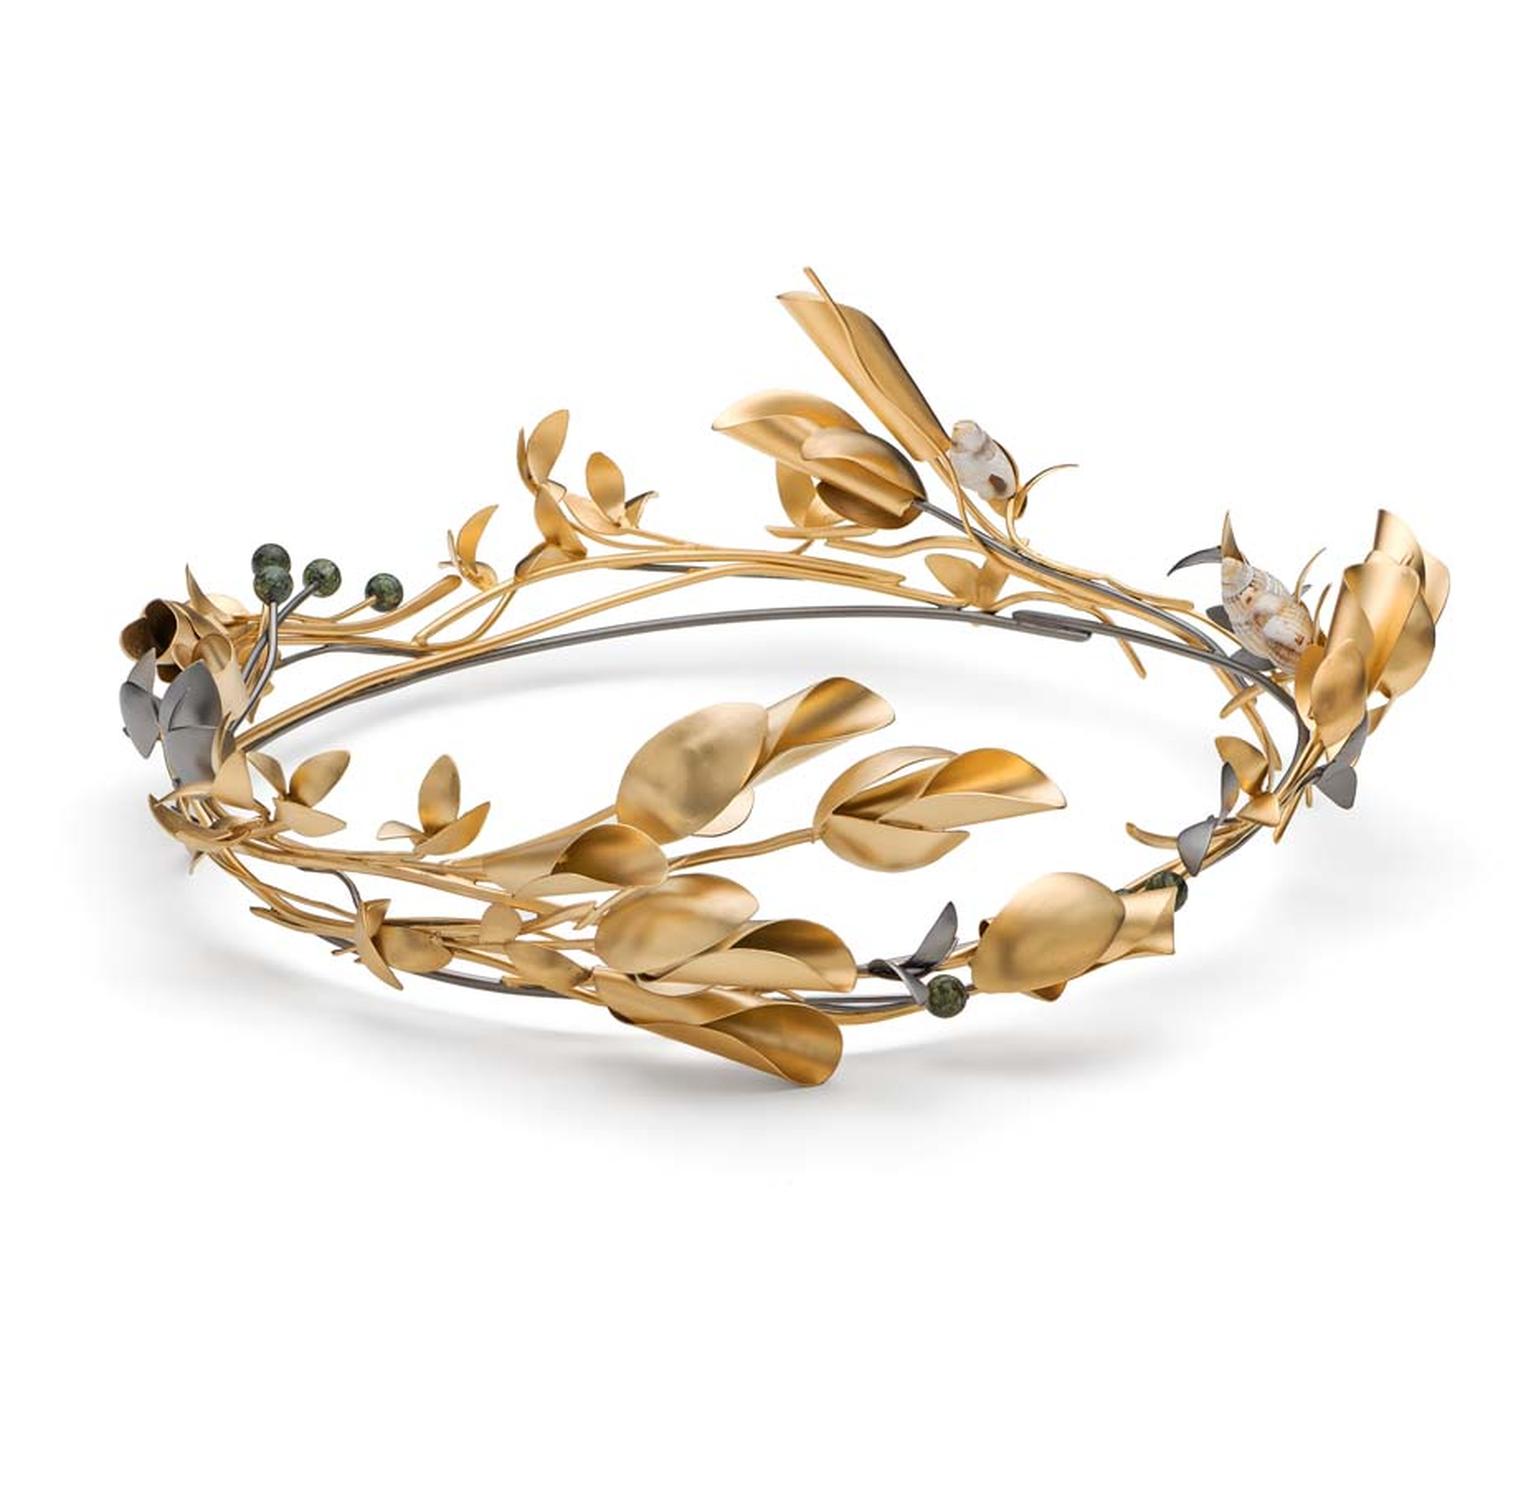 The phrase “blasted heath” used to describe the windswept trees along the coastline of Cornwall inspired this Mirri Damer crown, set with tiny shells and Serpentine - a Cornish semi-precious stone.